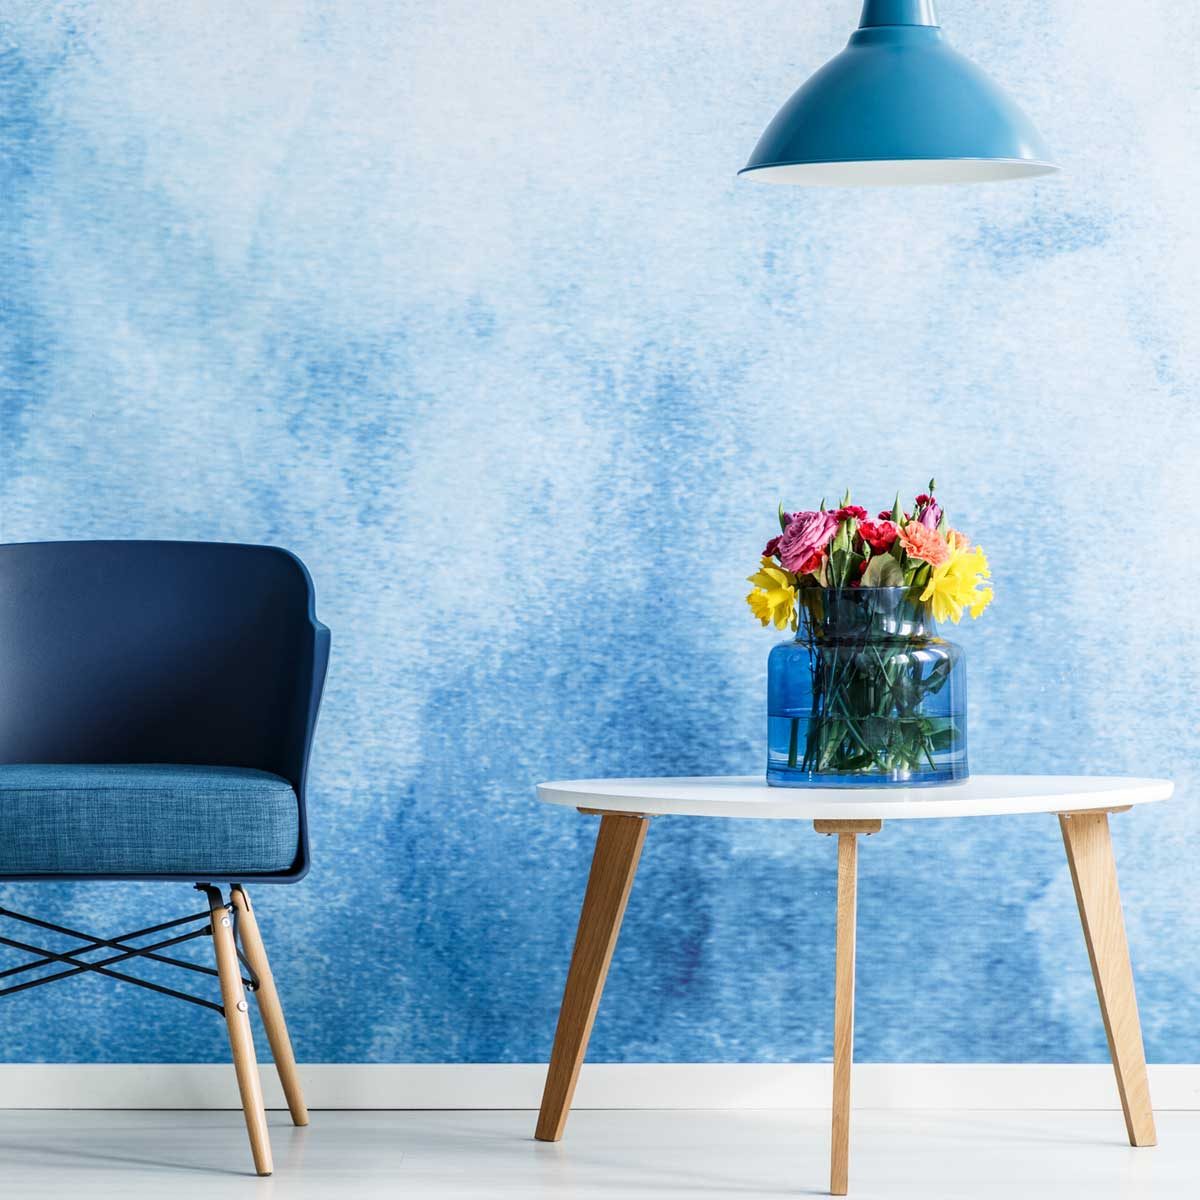 10 Wall Painting Ideas You'll Want to Add to Your Home